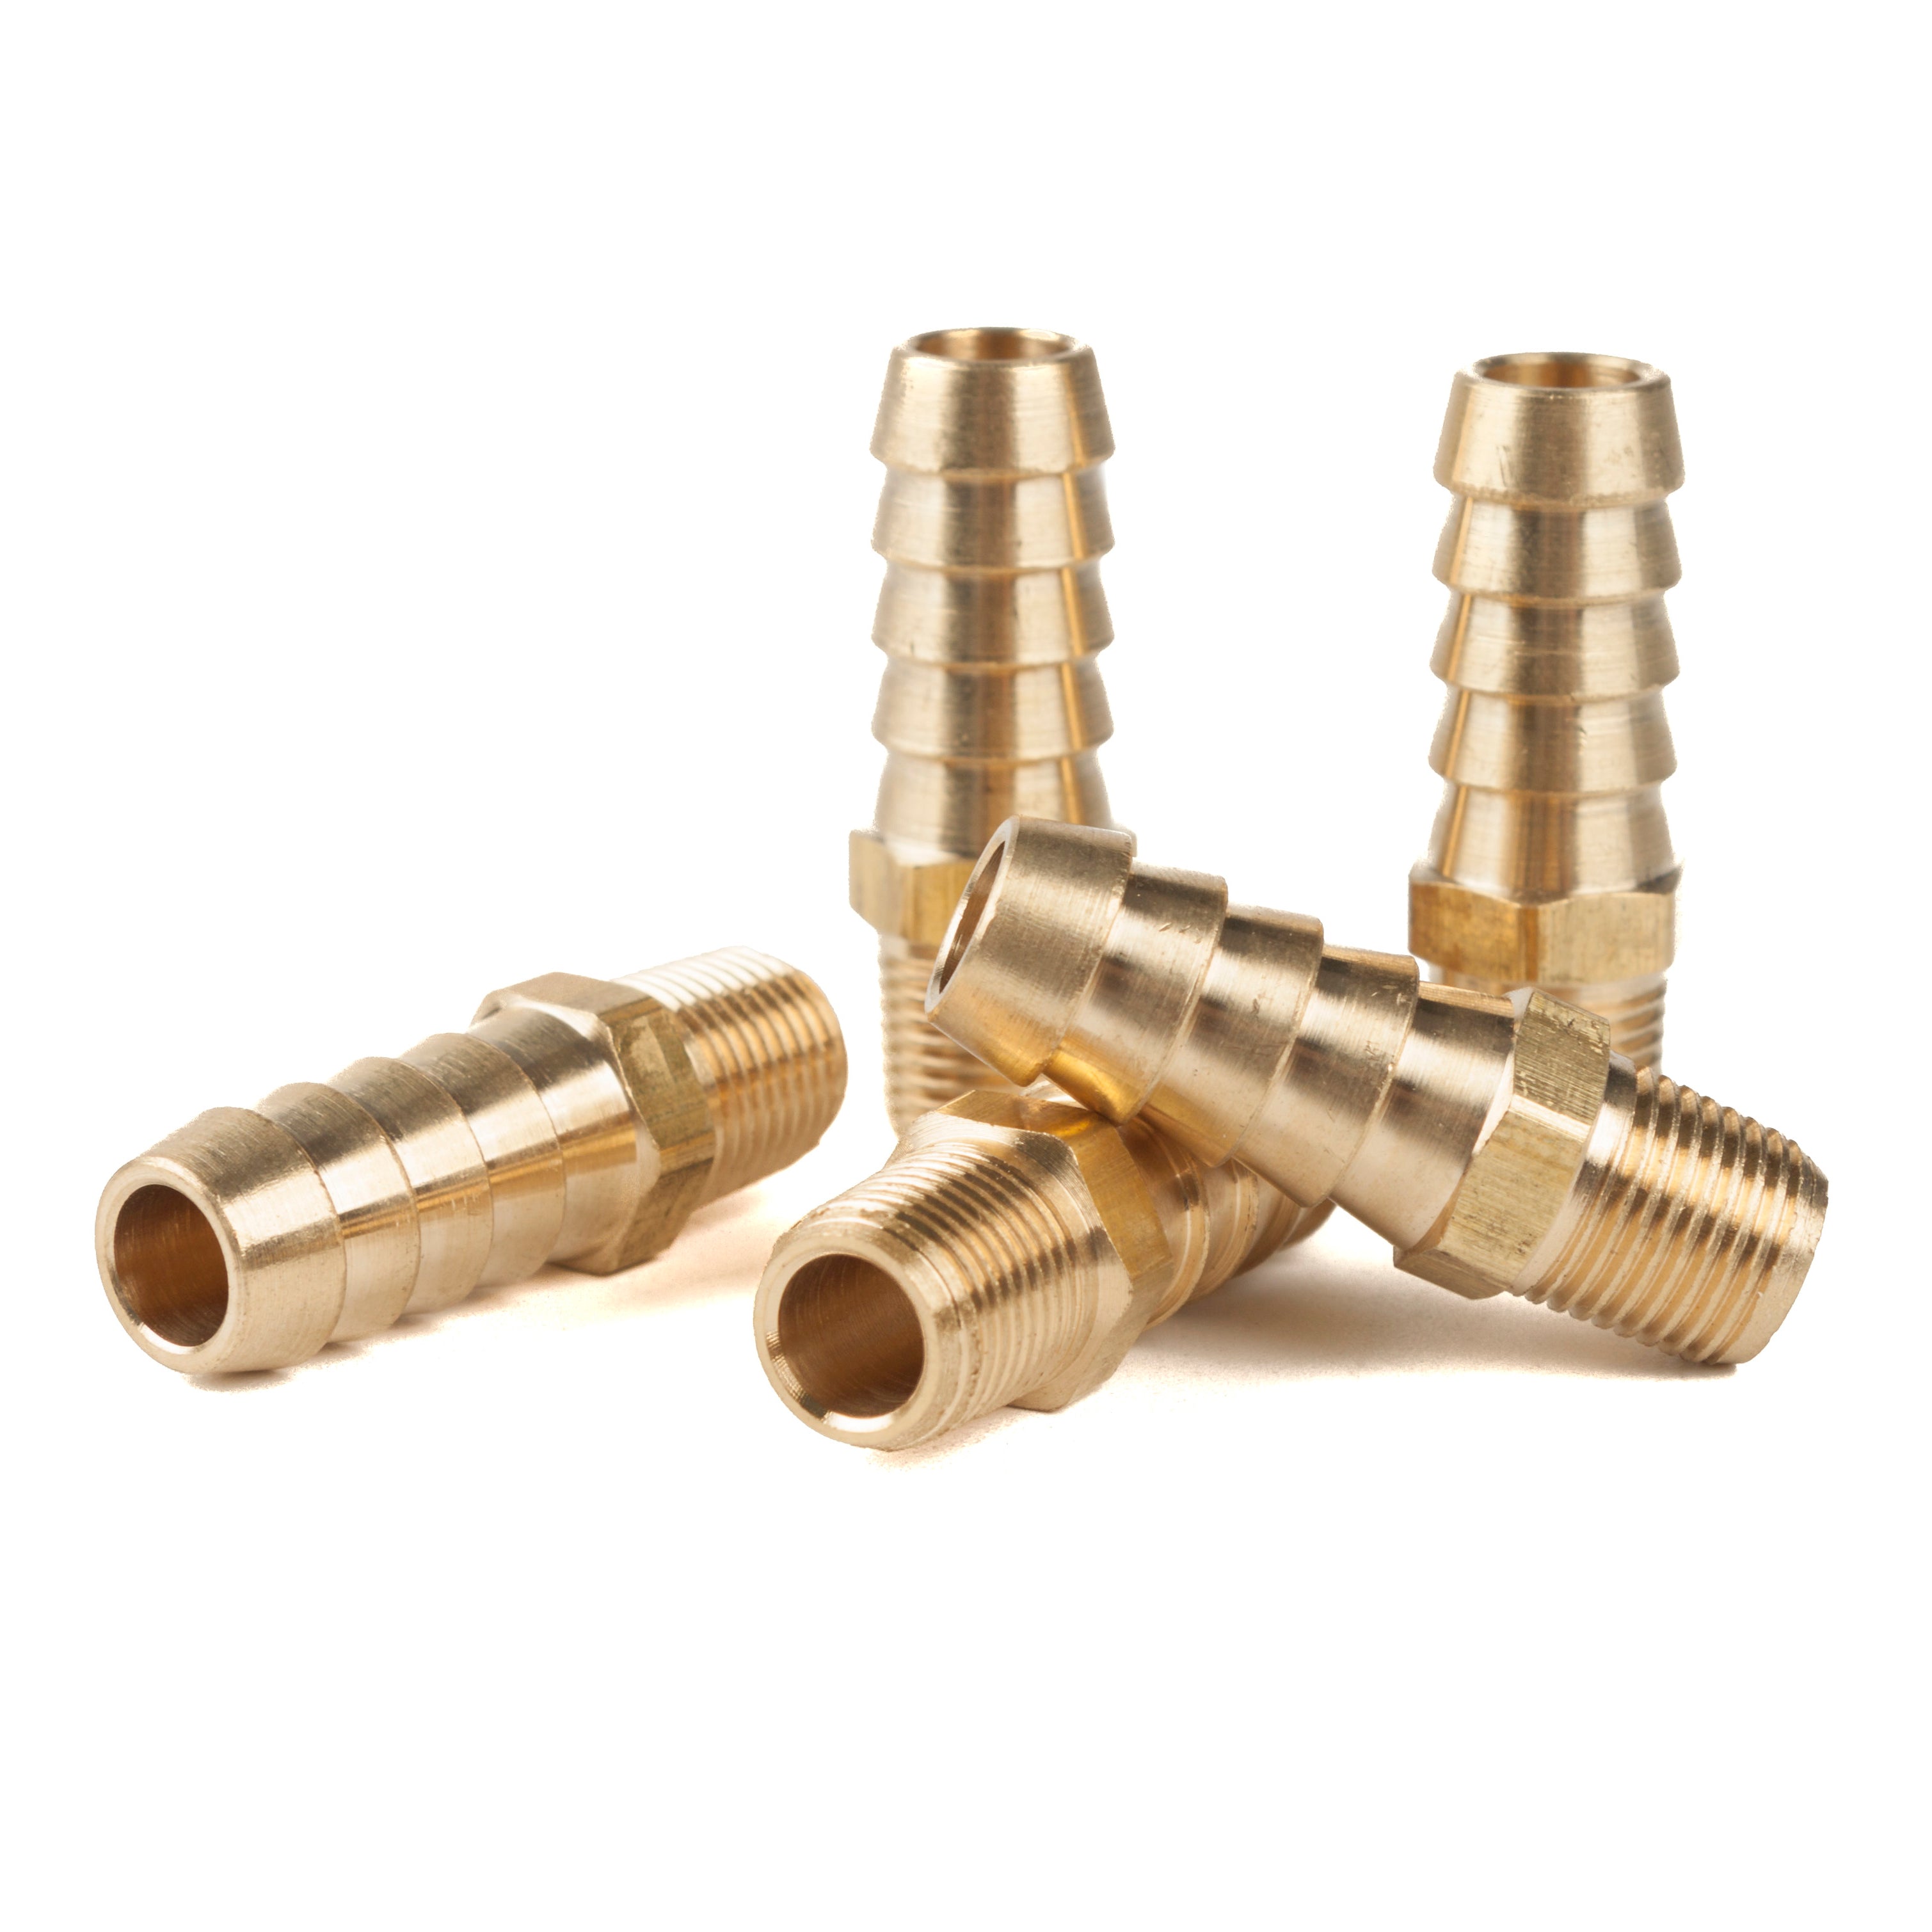 LTWFITTING Lead Free Brass Barbed Fitting Coupler/Connector 3/8 Inch Hose Barb x 1/8 Inch Male NPT Fuel Gas Water (Pack of 5)